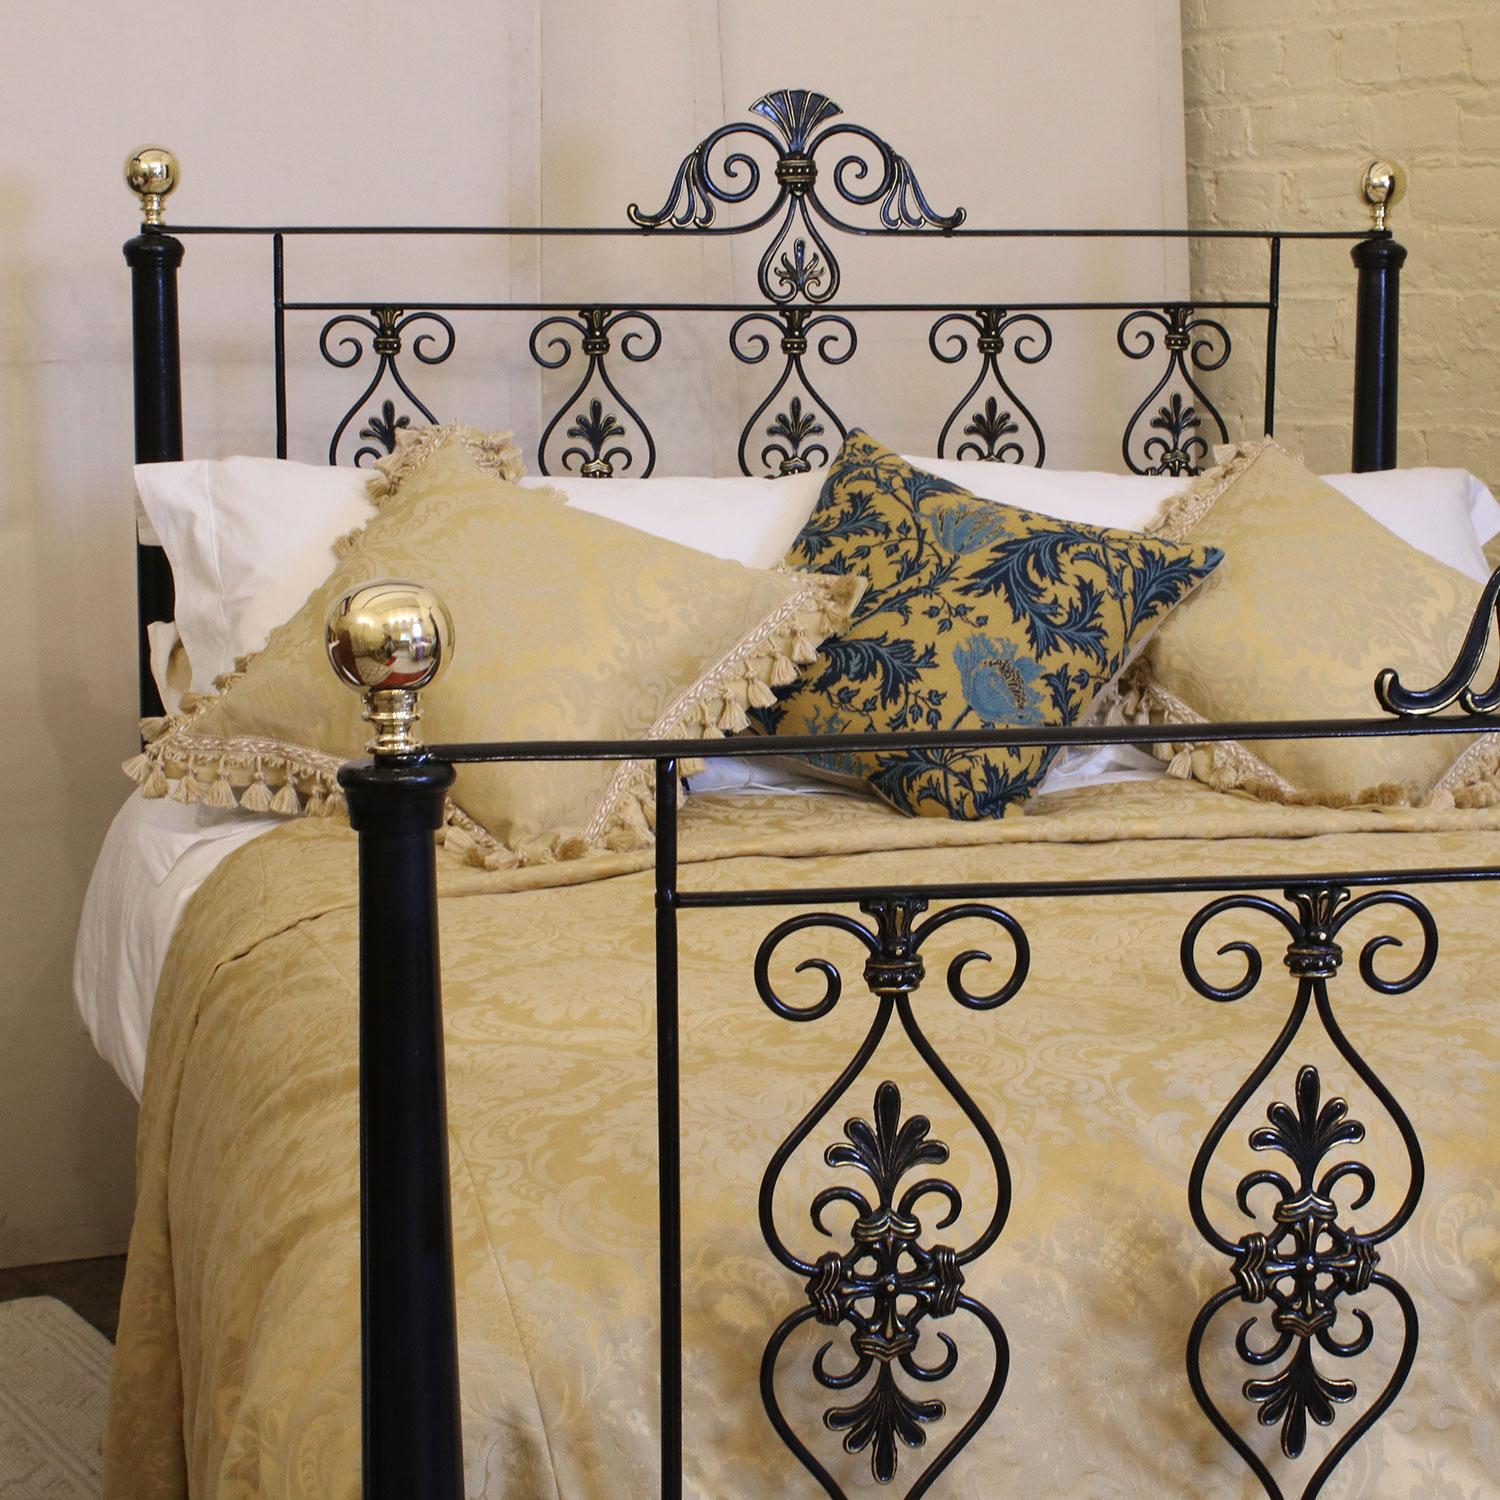 Mid-Victorian cast iron bedstead with magnificently cast decorative panels which have been hand gold-lined to highlight the splendid workmanship of this period.